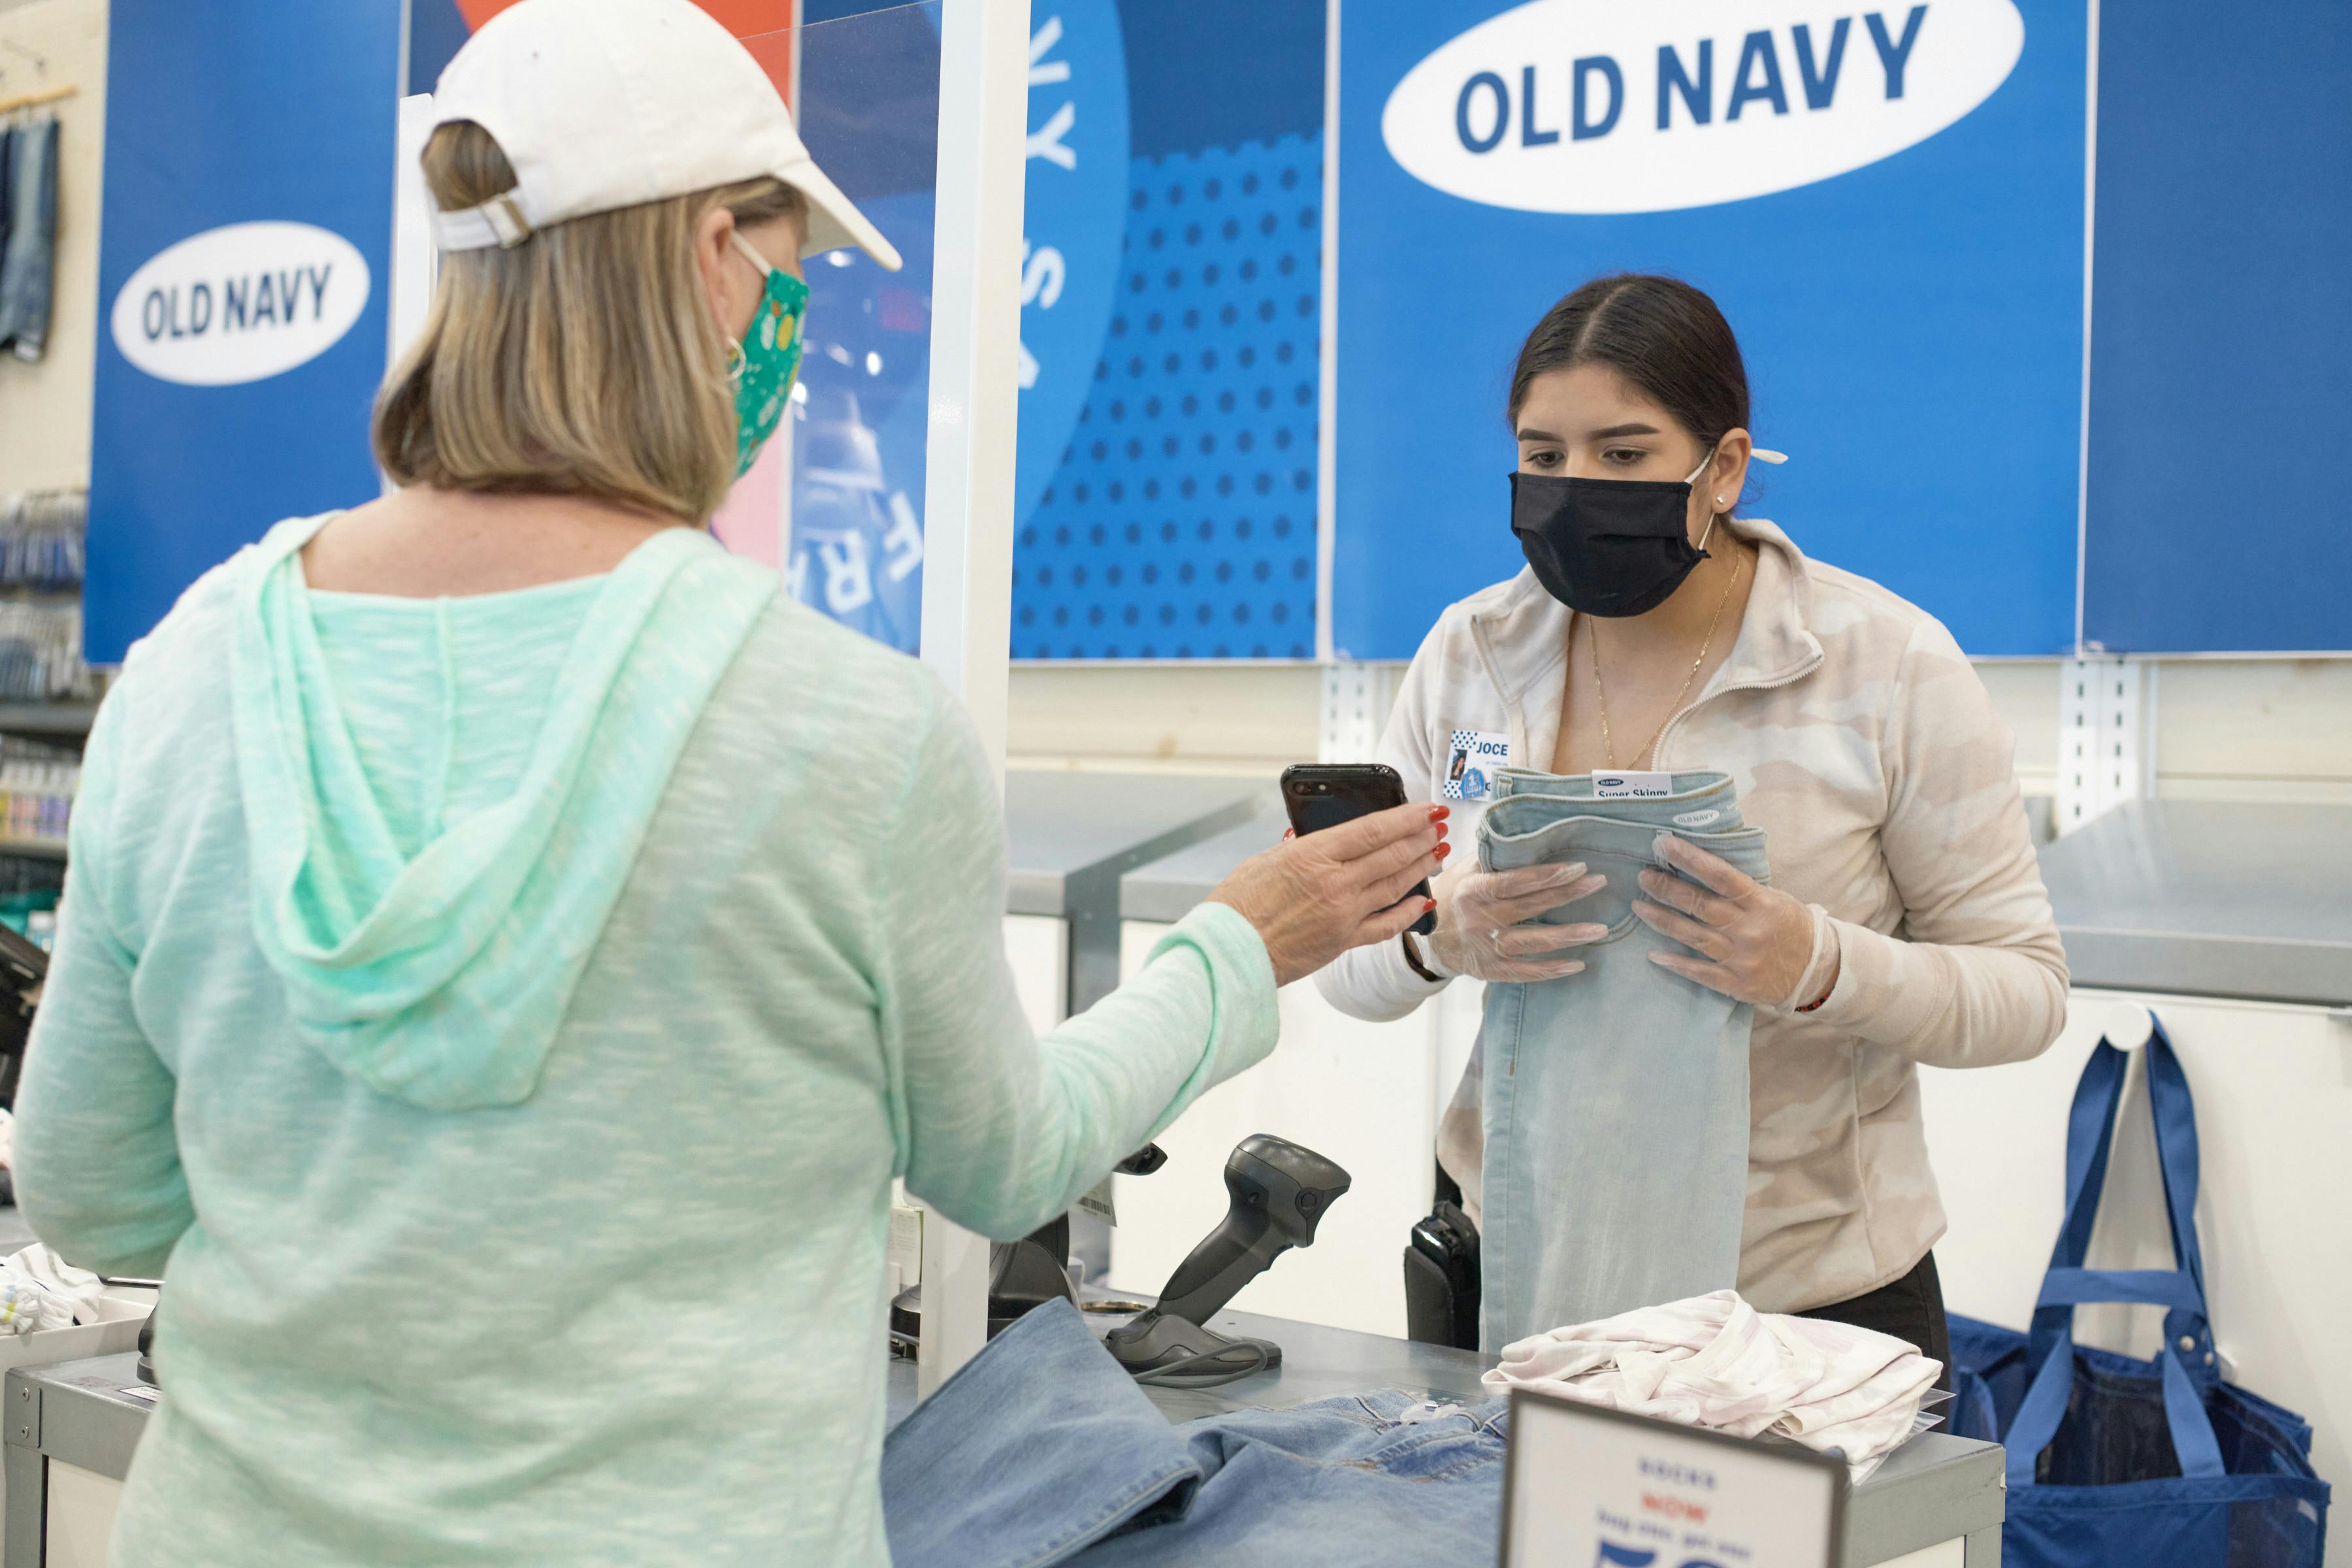 How To Get Free Clothes With Old Navy Credit Cards The Krazy Coupon Lady